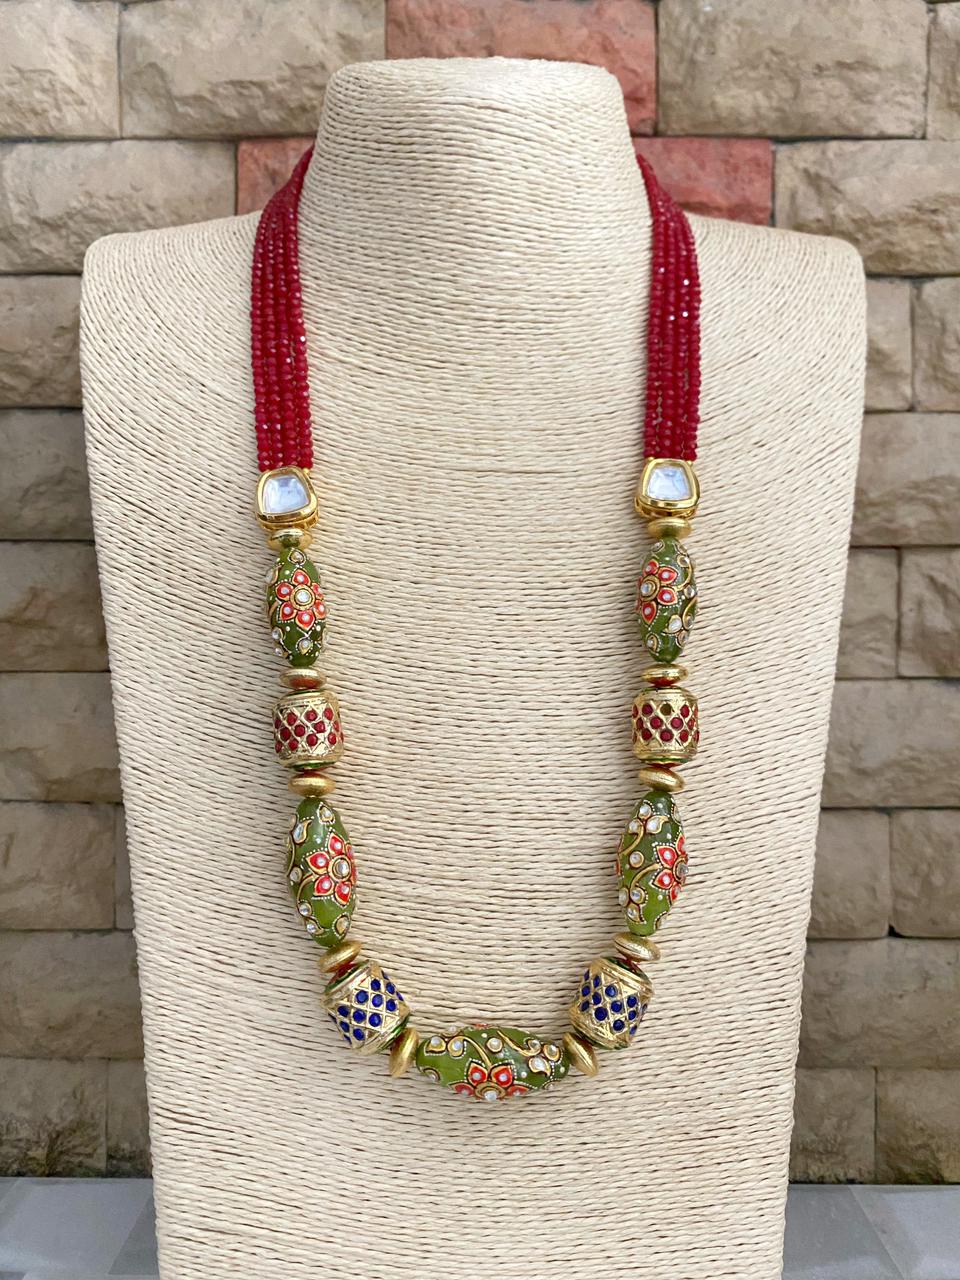 Designer Handcrafted Red Crystal Beads Necklace For Ladies By Gehna Shop Beads Jewellery